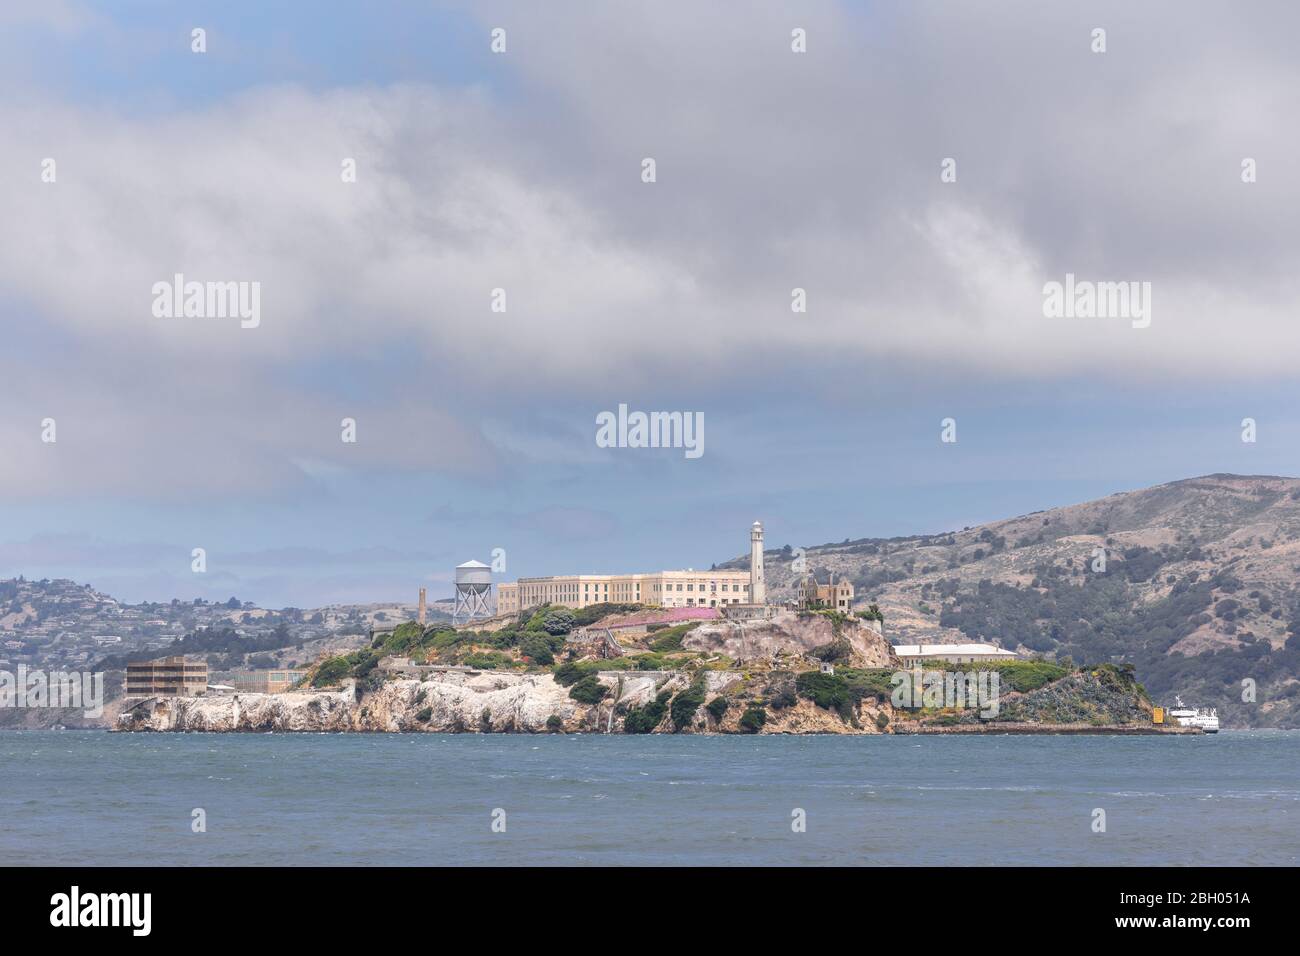 Close up of the island of Alcatraz in San Francisco Bay under a blue summer sky with puffy clouds Stock Photo